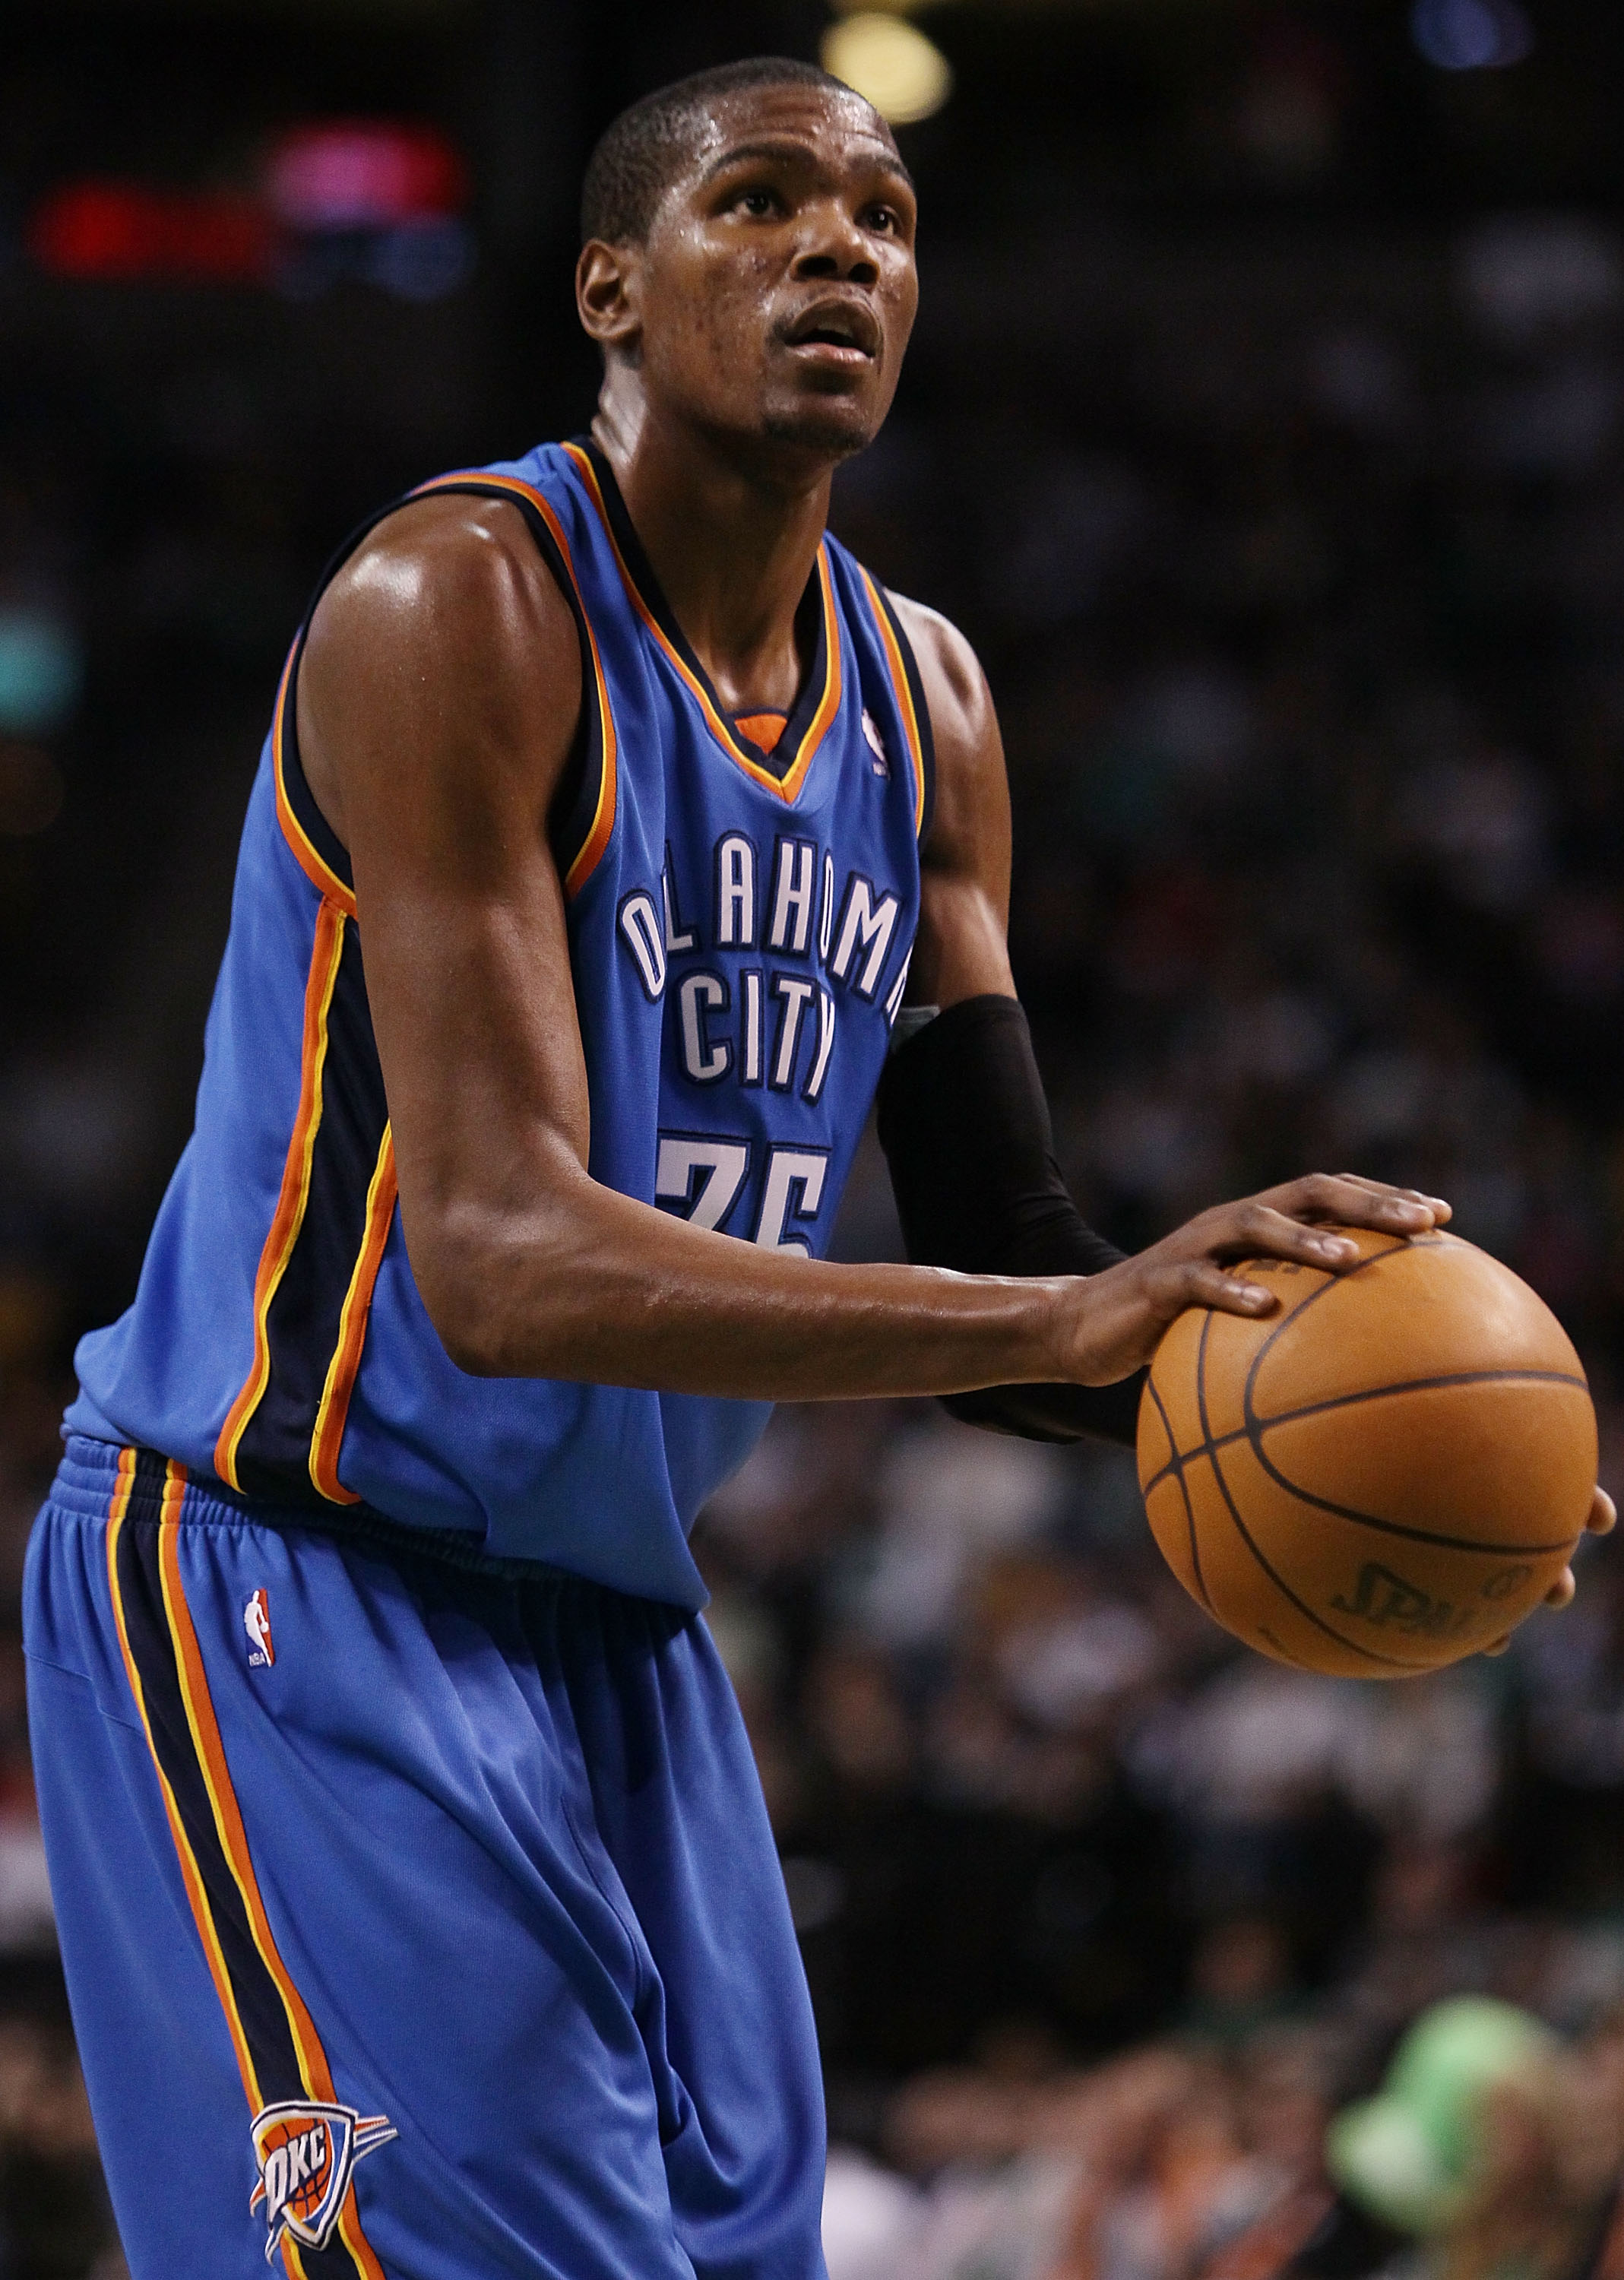 Kevin Durant And The Top 20 Free Throw Shooters In Nba History